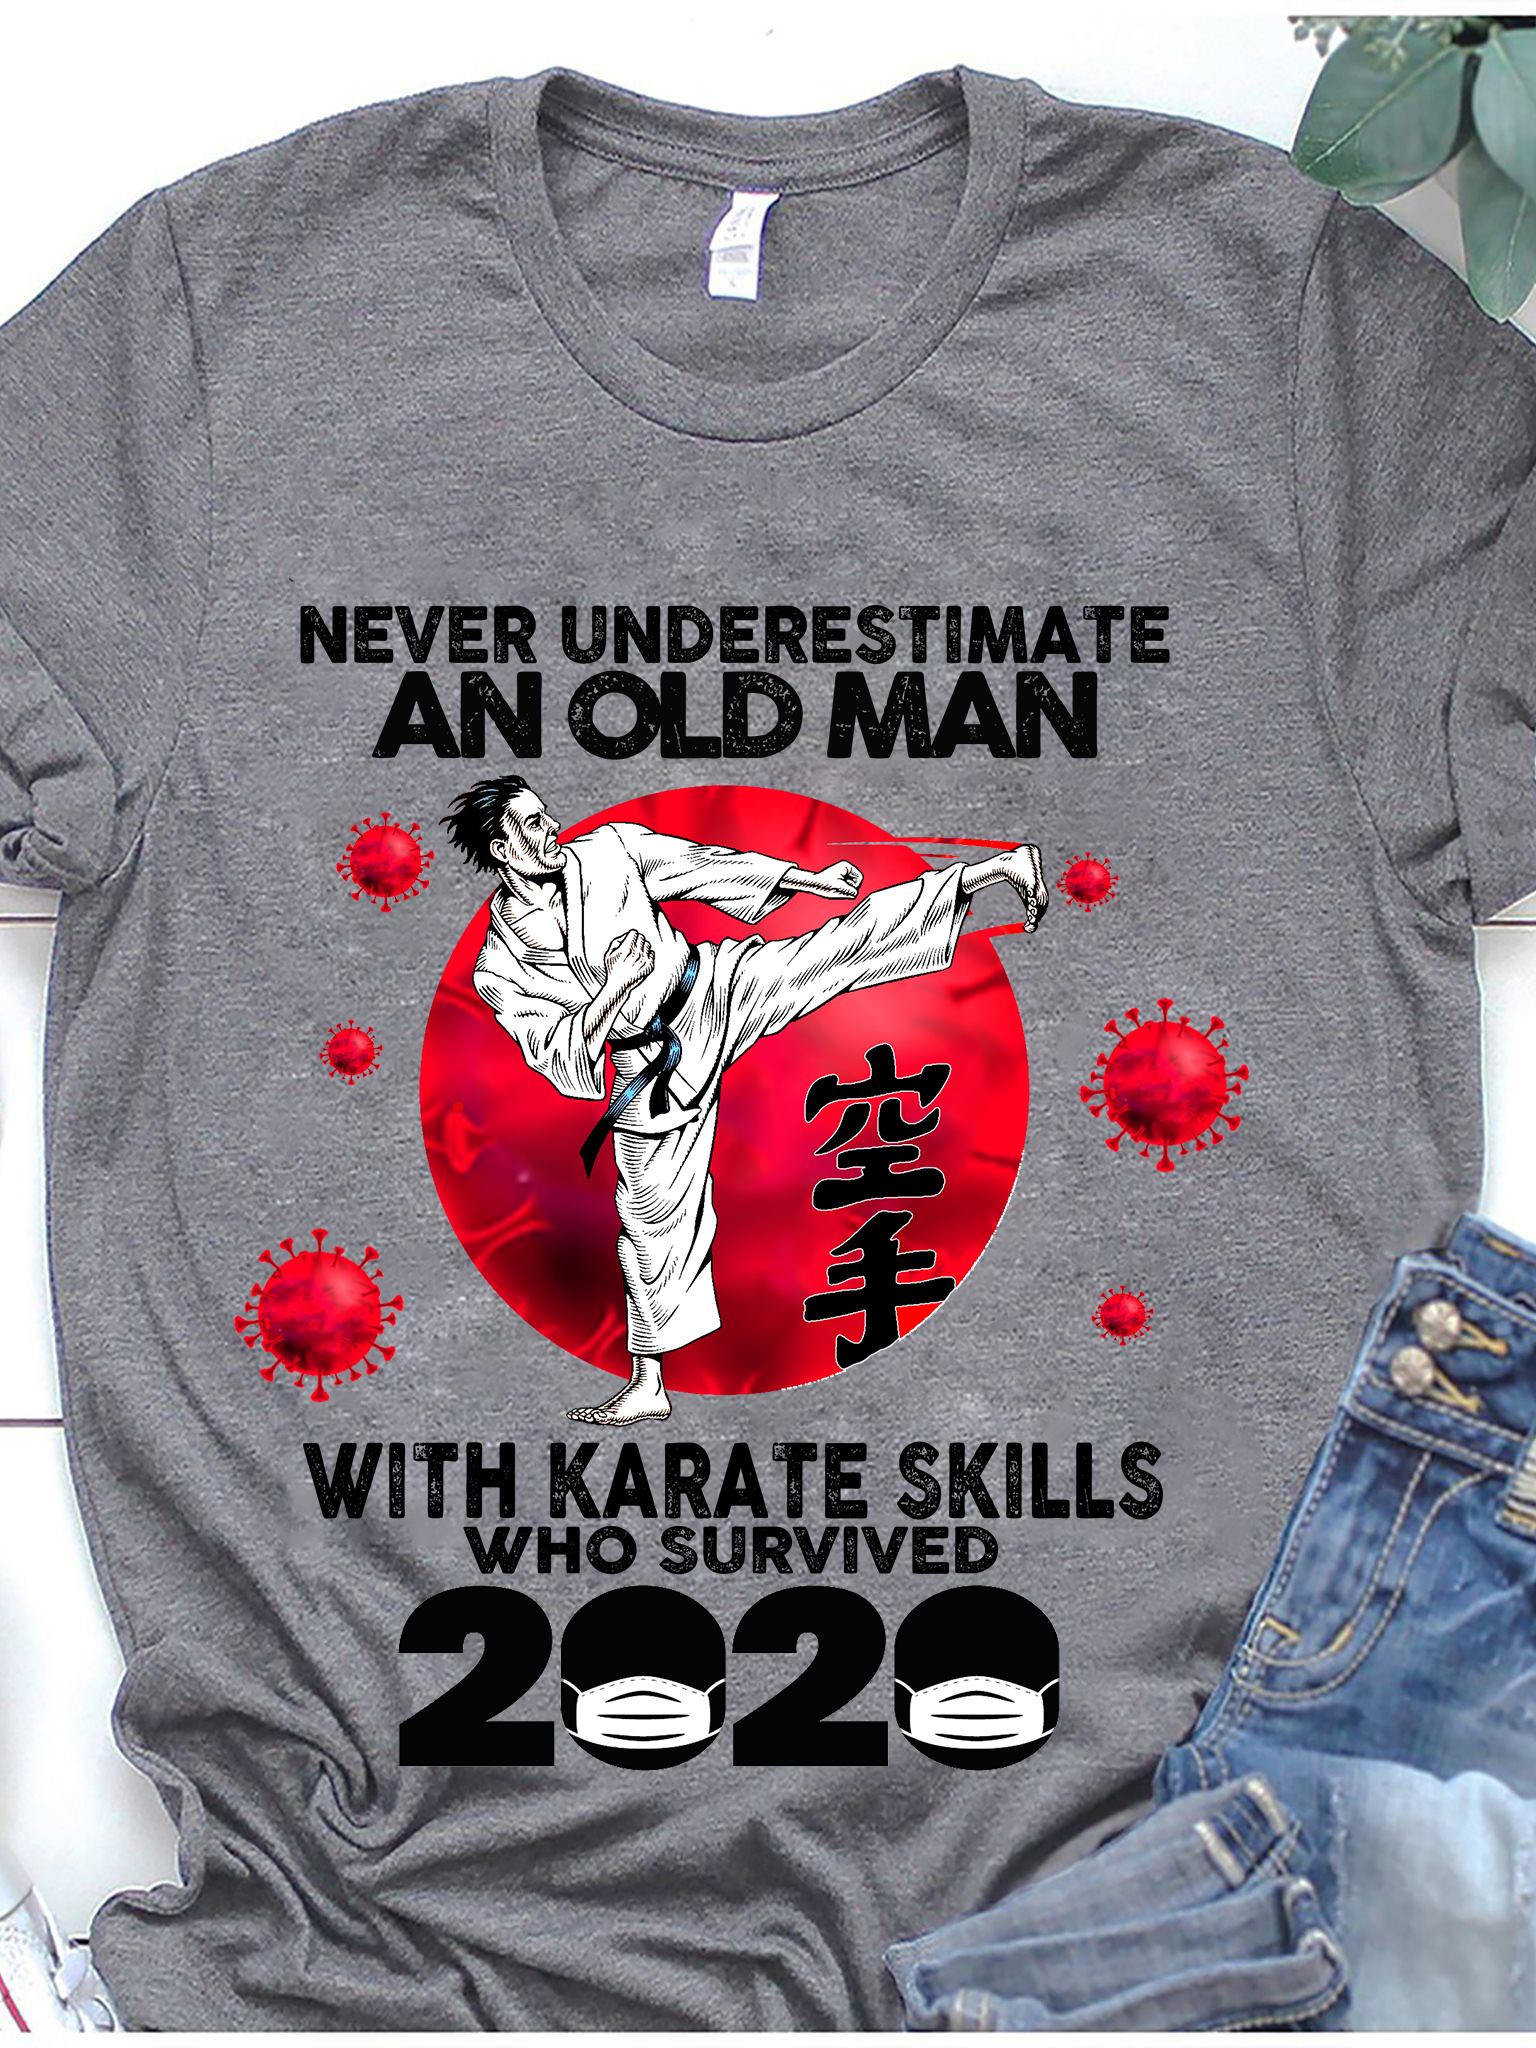 Never underestimate an old man with karate skills who survived 2020